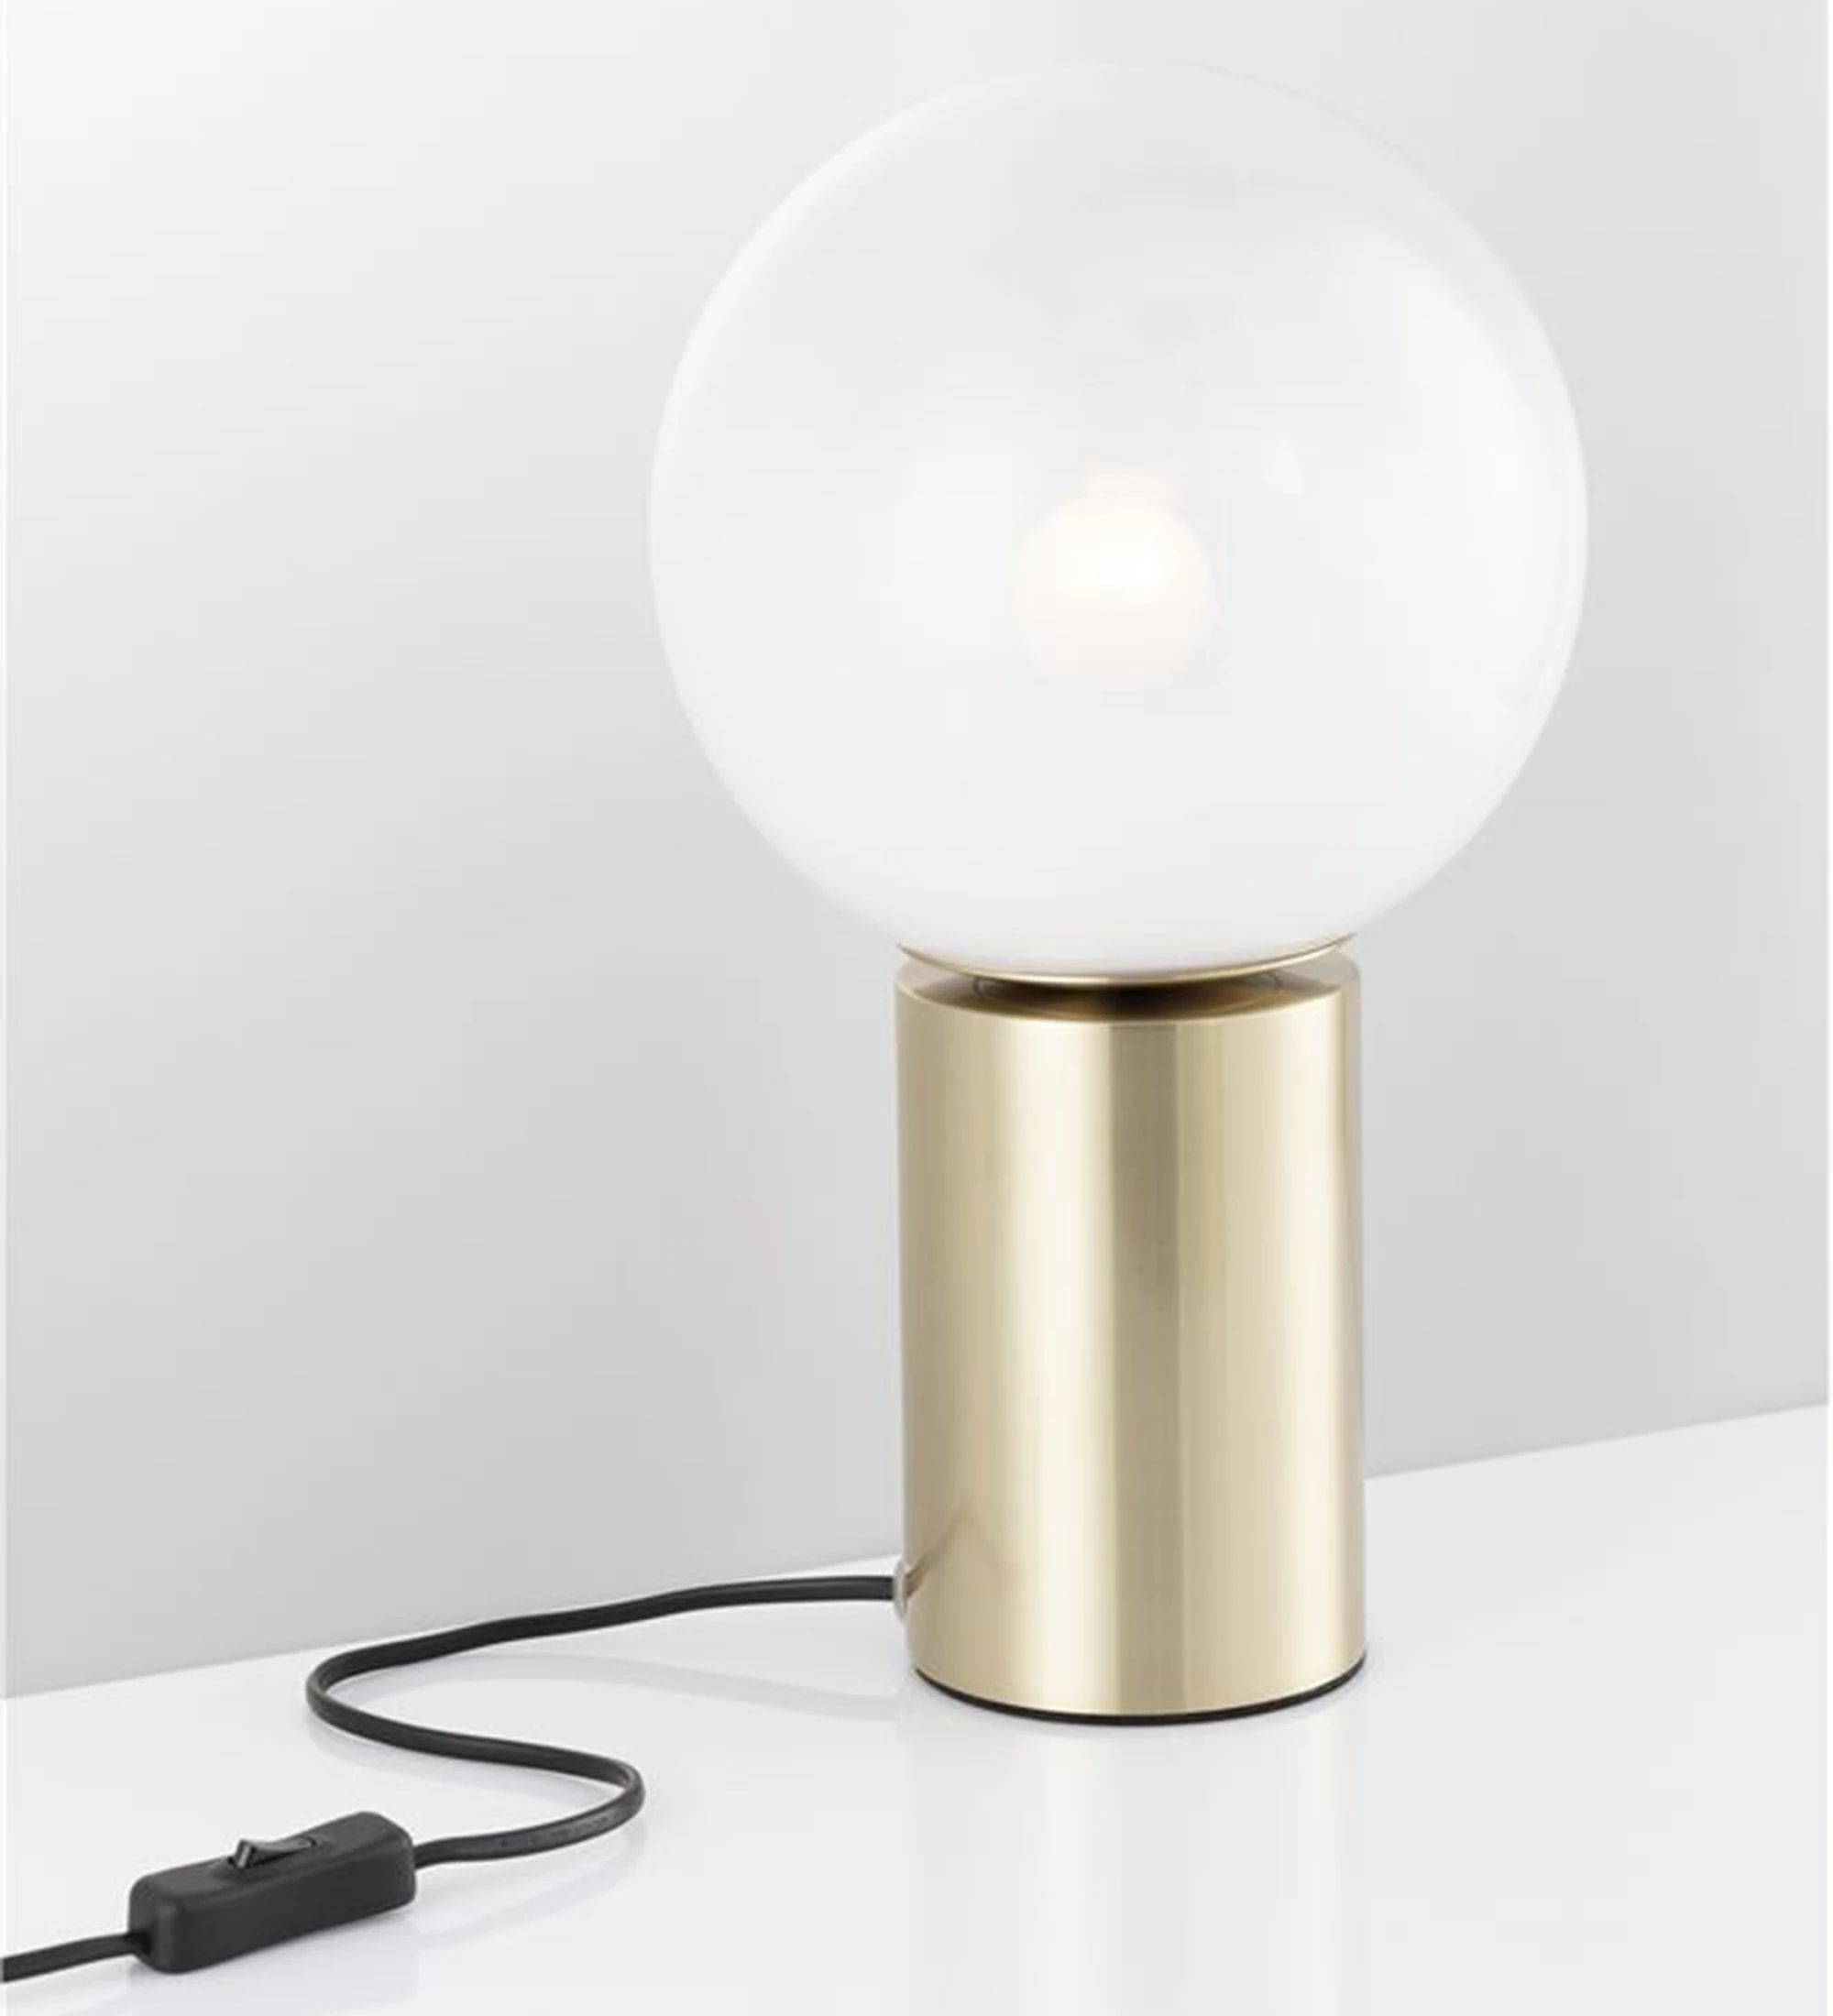 Table lamp in golden brass and frosted glass diffuser.